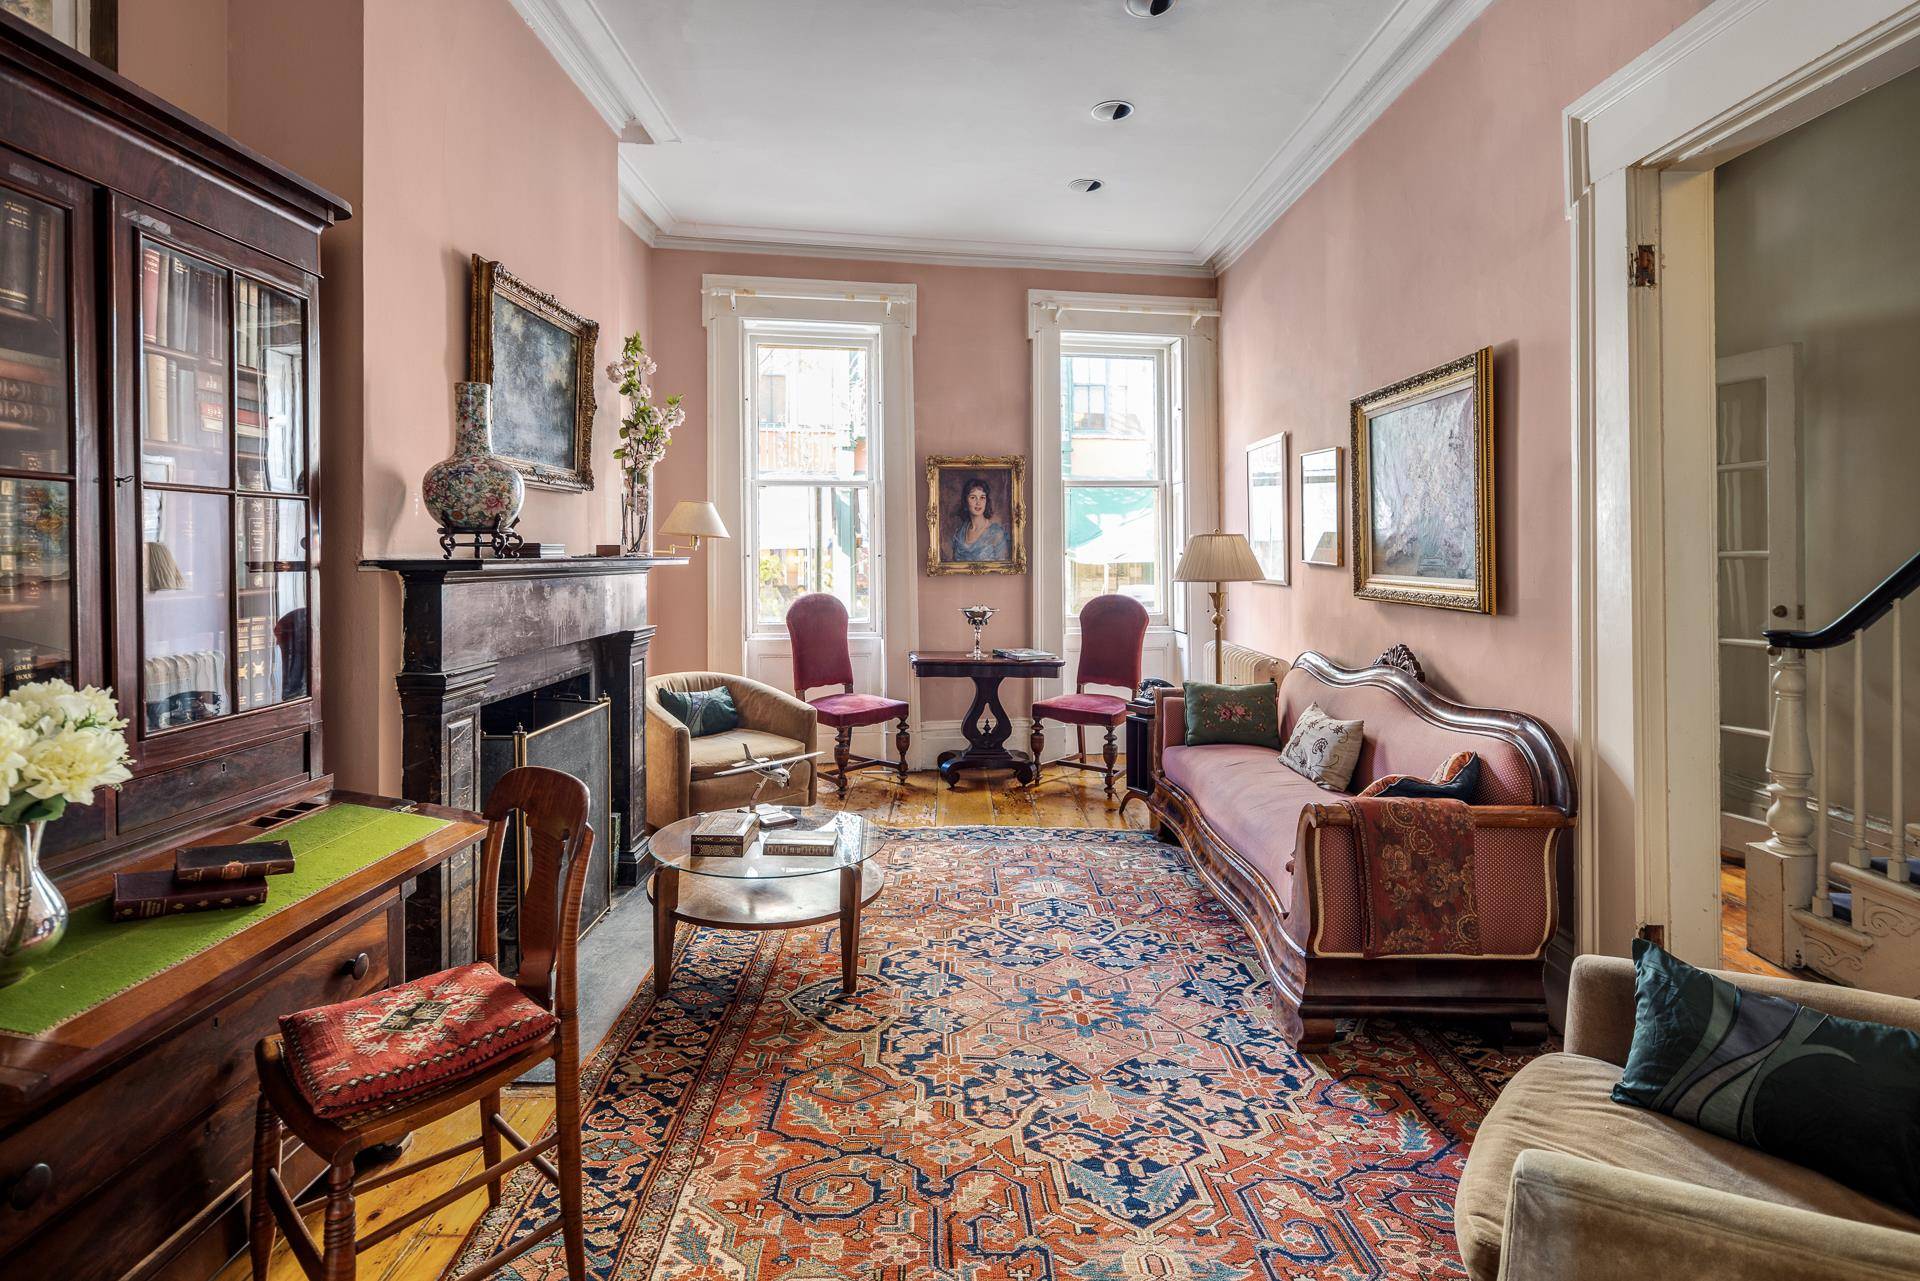 Enchanting Beauty ! Located on one of the most desirable leafy cobblestone streets in the West Village, this wonderful Greek Revival row house offers everything one dreams of in a ...